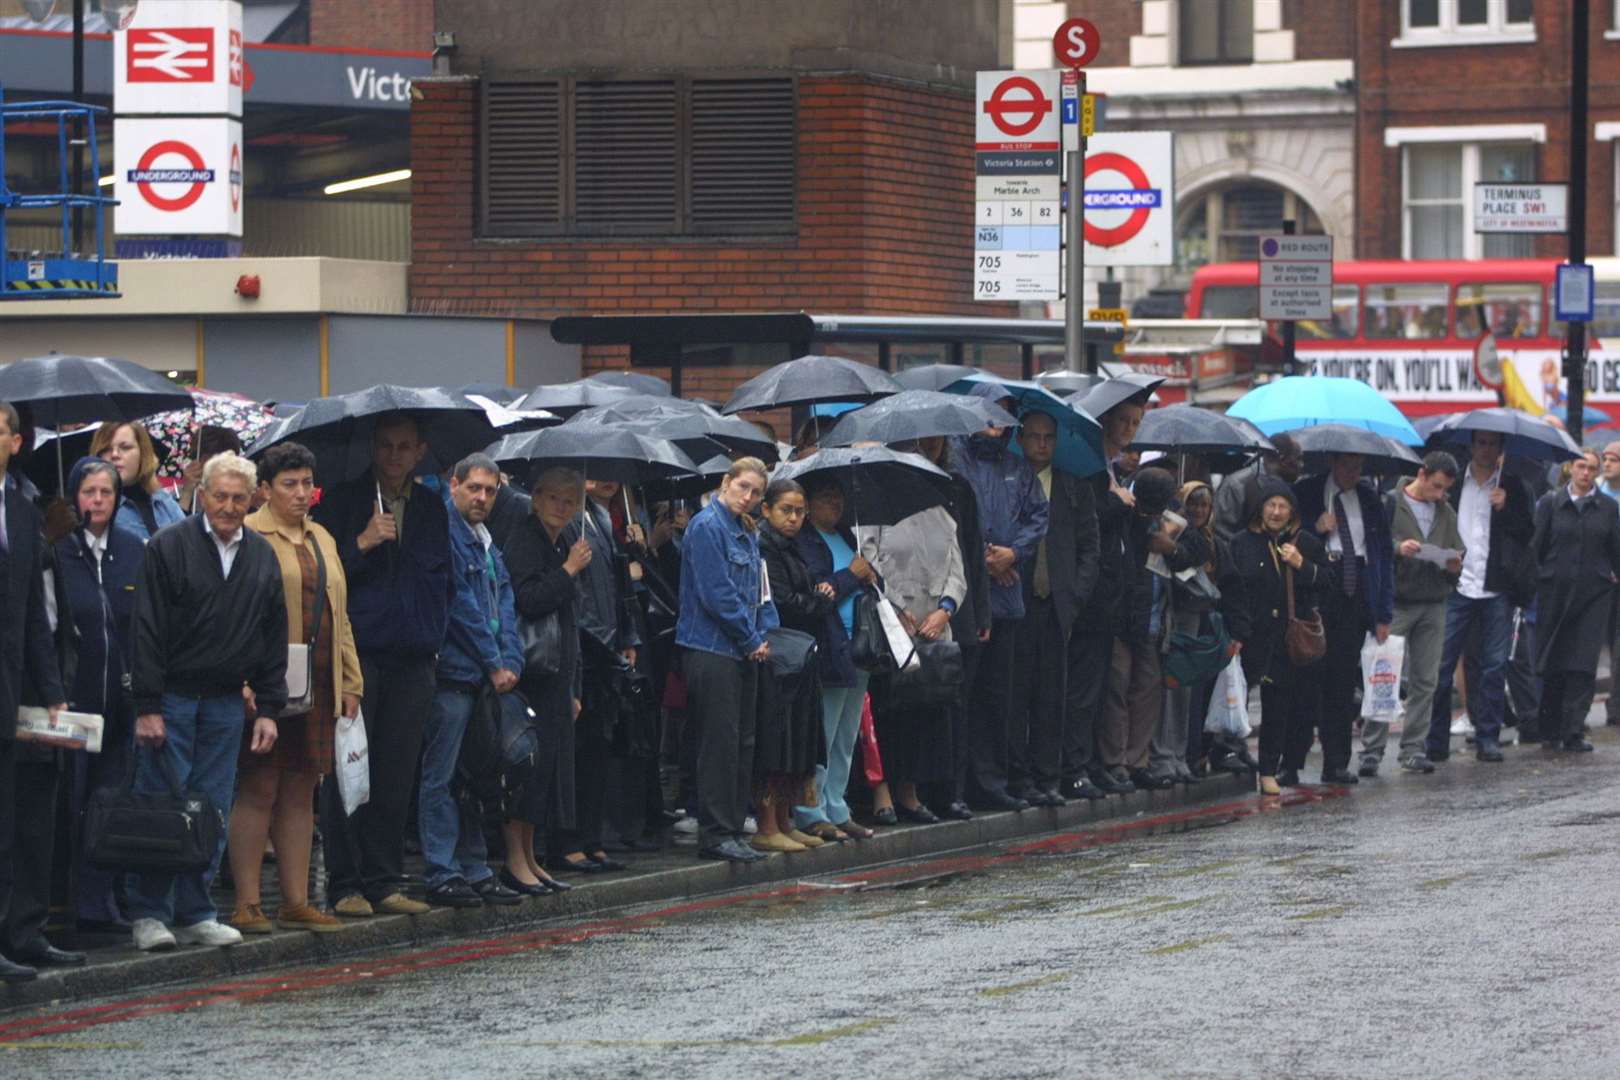 Next week's national rail strike is threatening to disrupt thousands of commuters. Photo: PA.